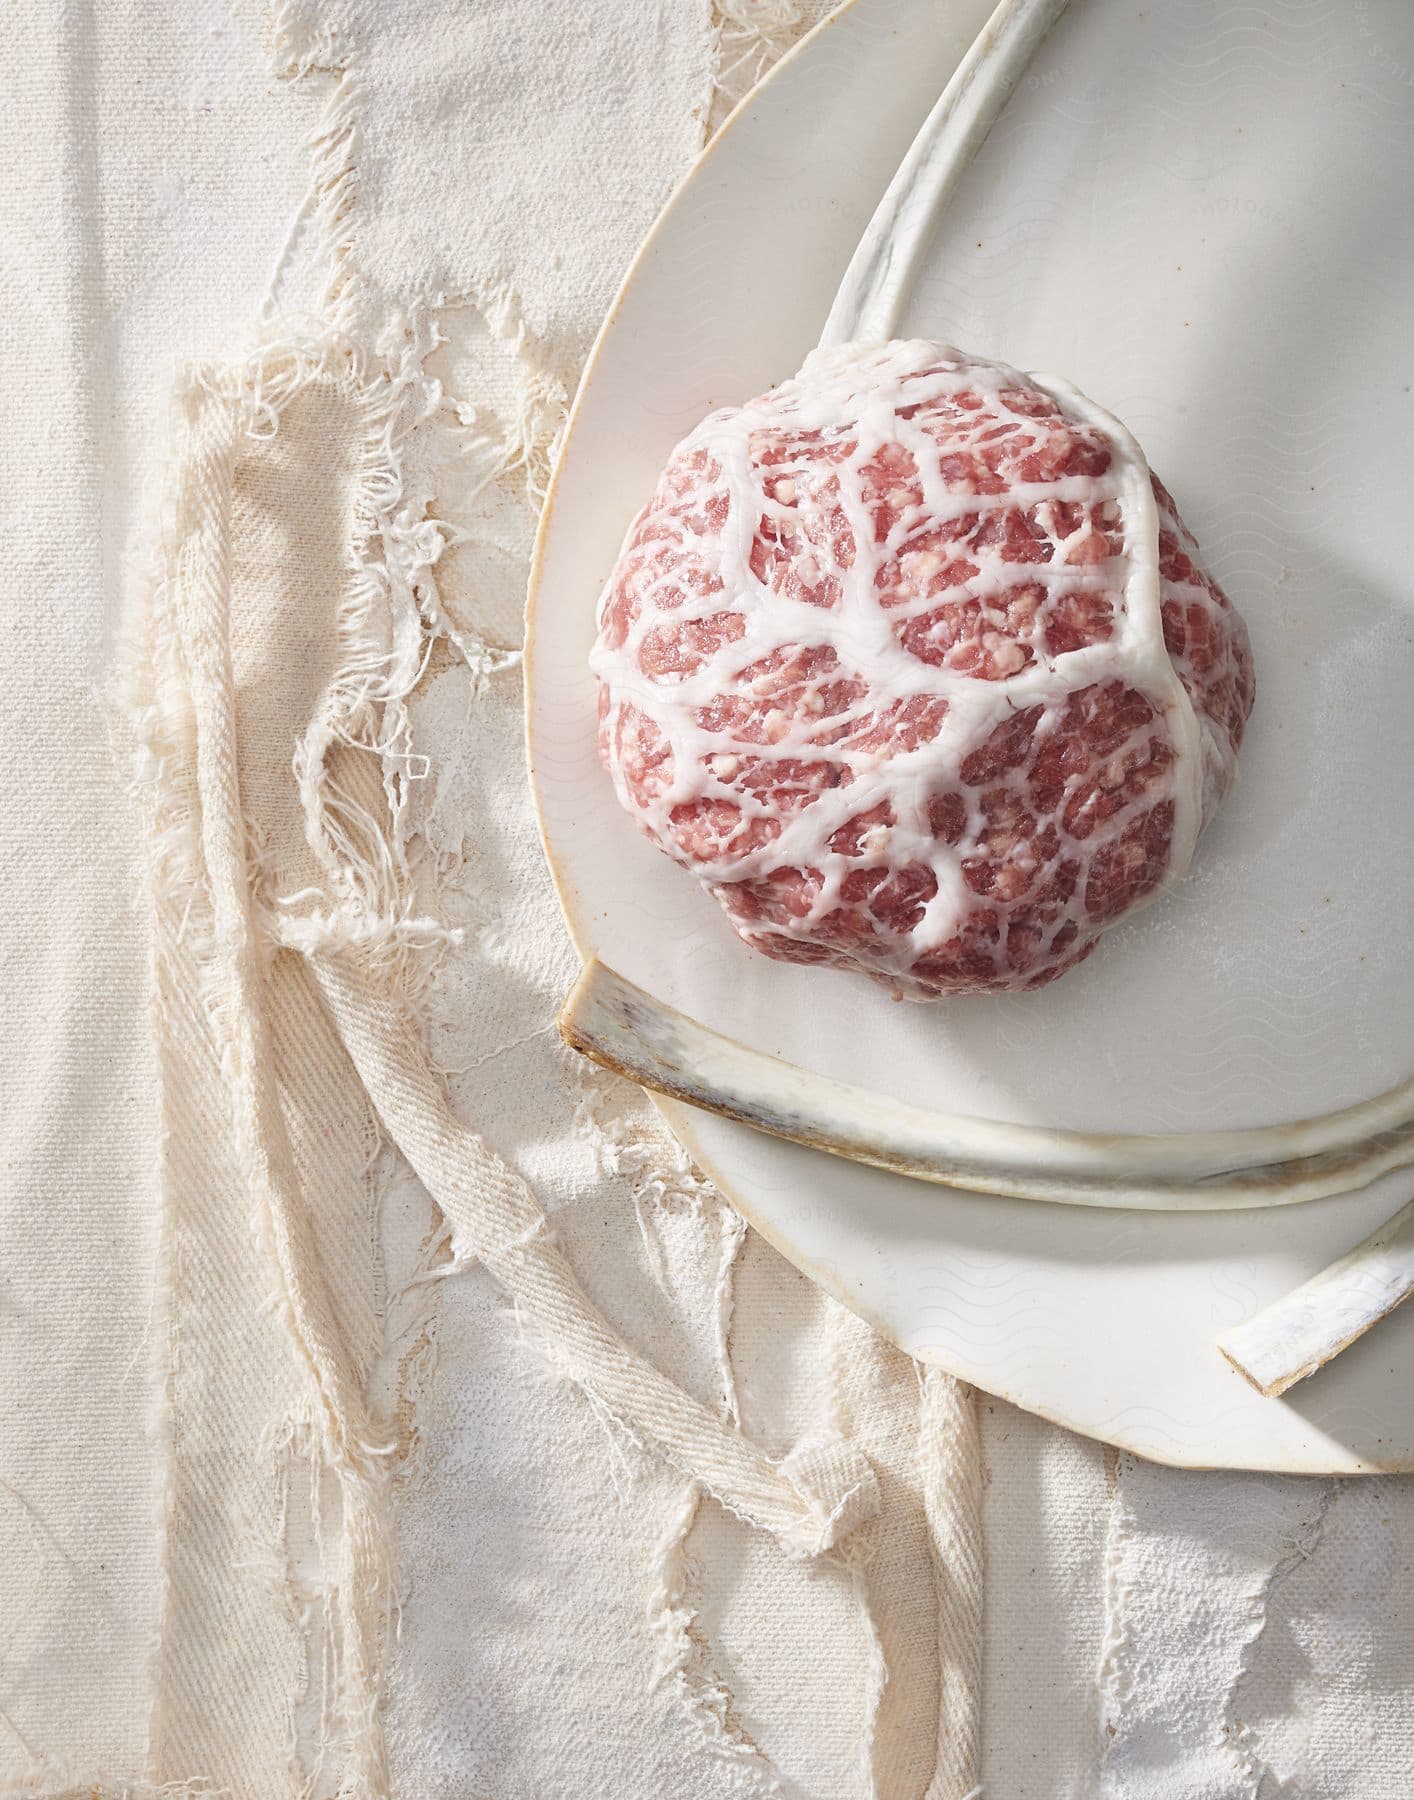 A patty of ground beef with streaks of fat on a white plate